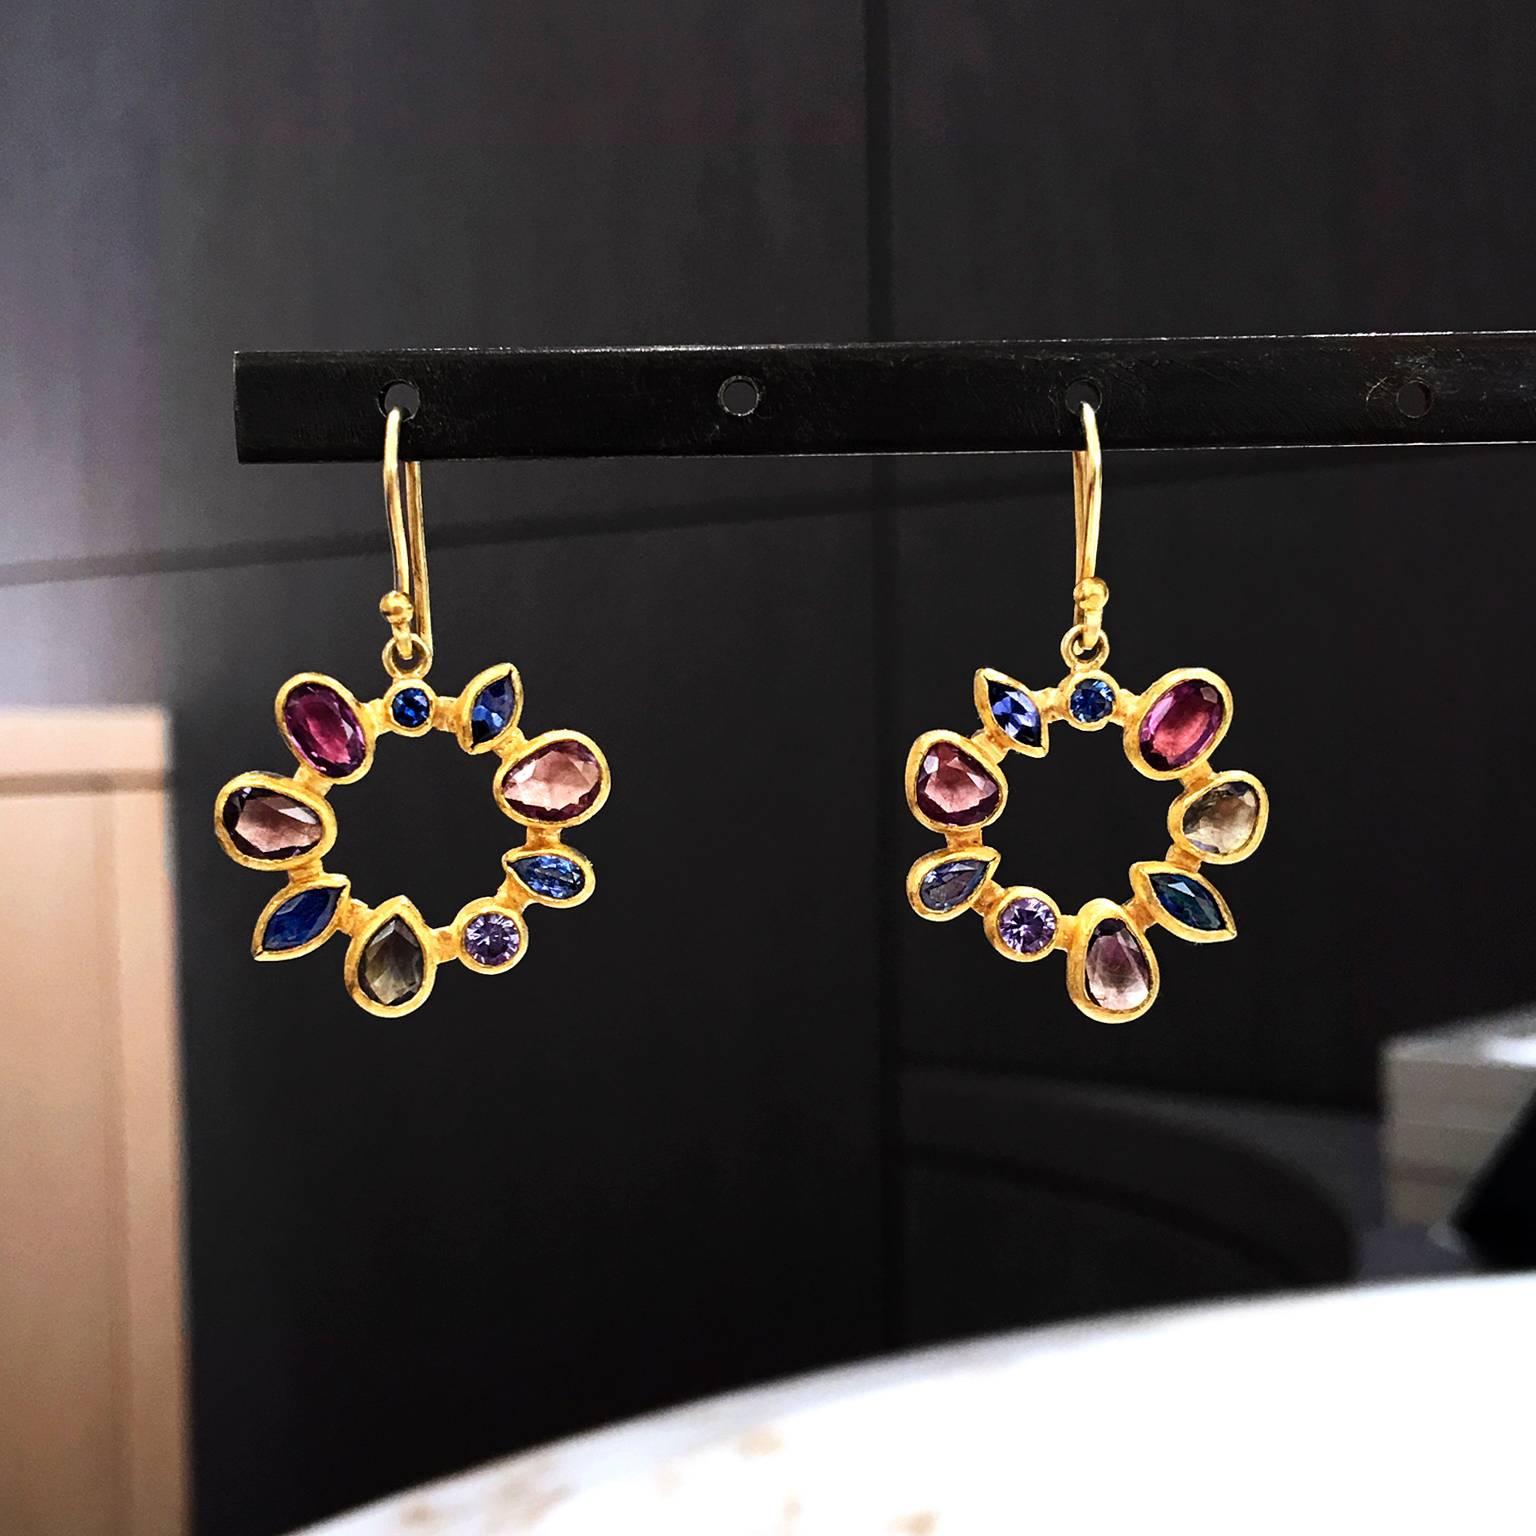 One of a Kind Radial Drop Earrings handcrafted by renowned jewelry designer Petra Class with beautifully harmonized shimmering blue, violet, red and purple faceted Montana sapphires bezel-set in Petra's signature 22k yellow gold dangling on 18k